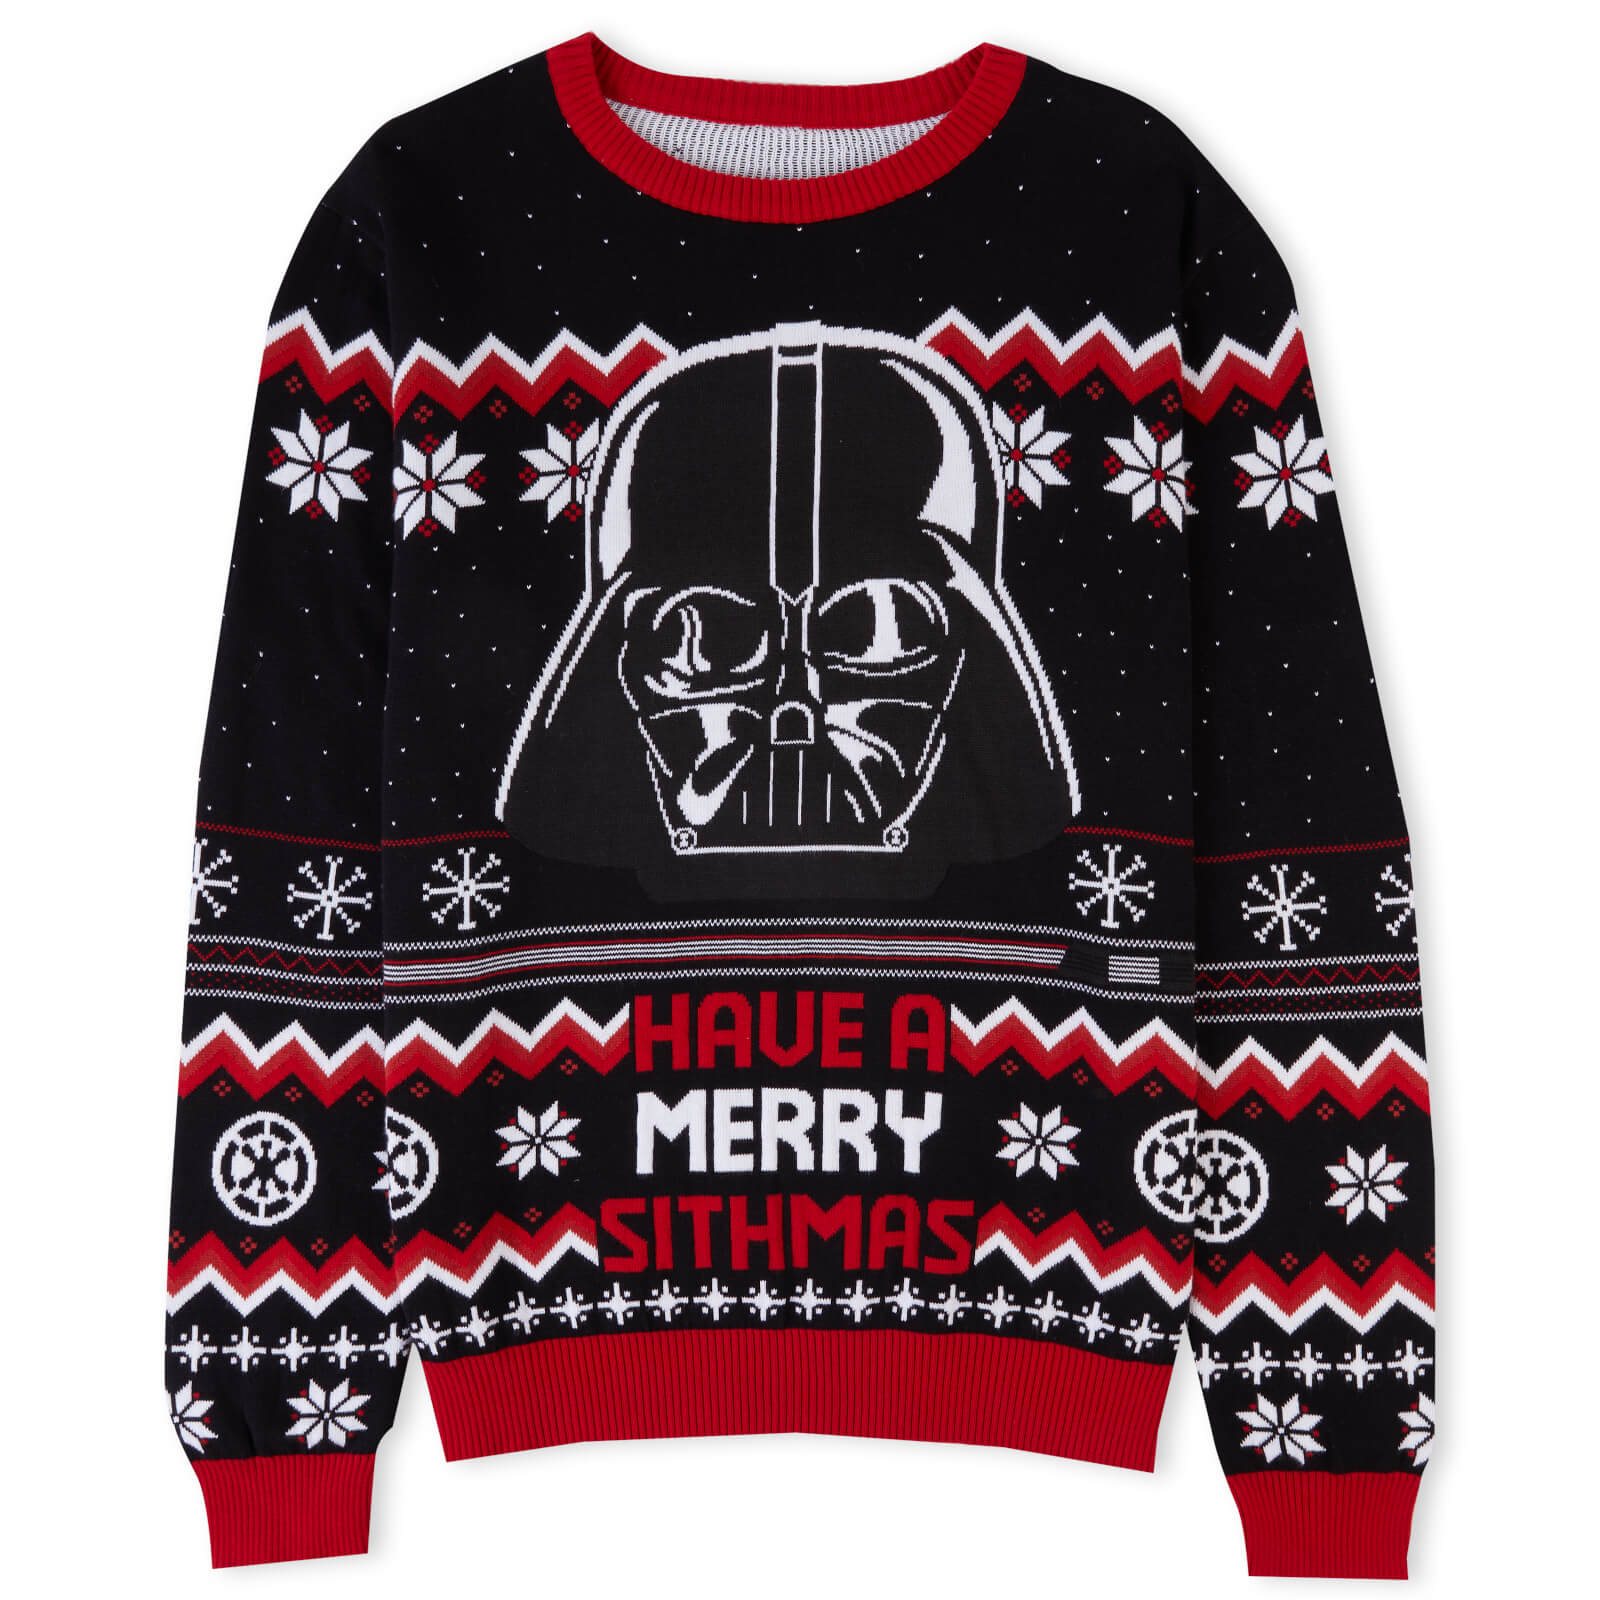 Have a Merry Sithmas Christmas Knitted Jumper Black - L